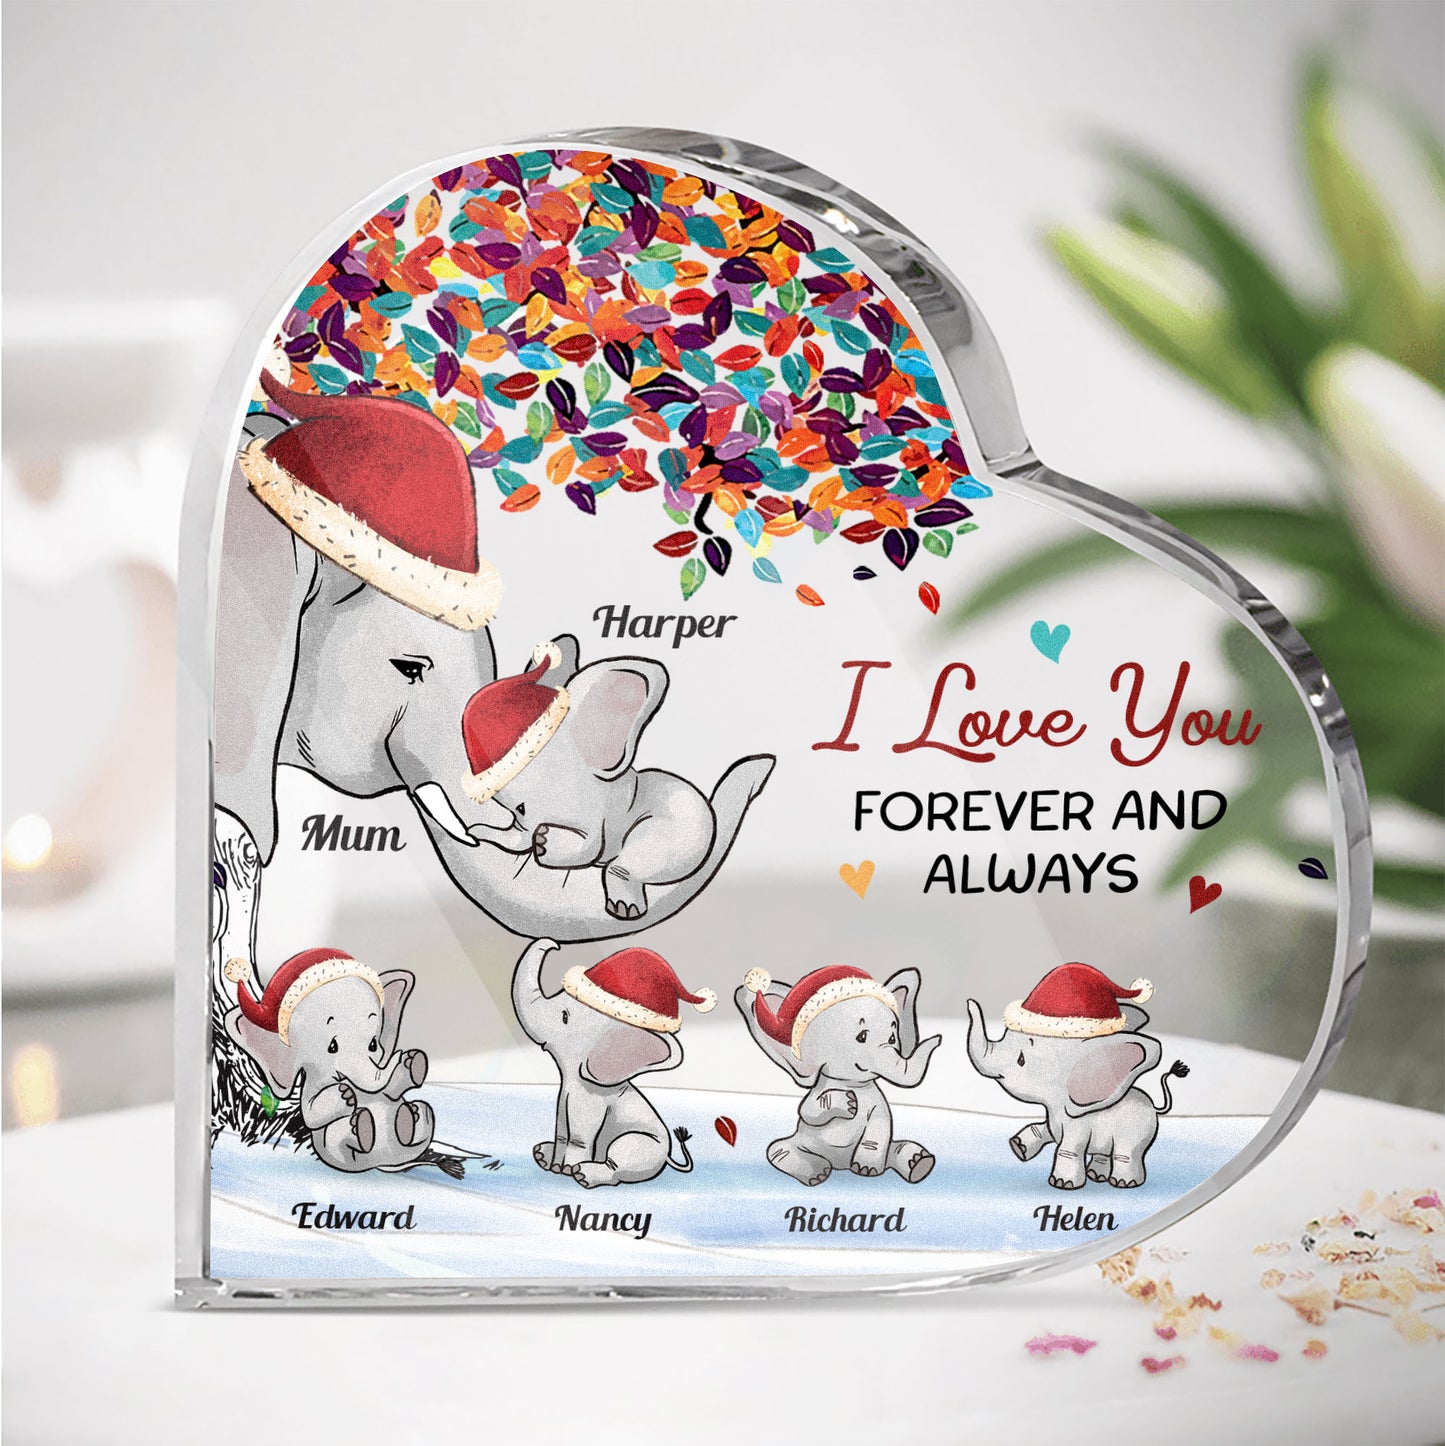 I Love You Forever & Always - Personalized Heart Shaped Acrylic Plaque - Christmas Gift For Daughters, Sons, Gift From Sons, Daughters To Mom